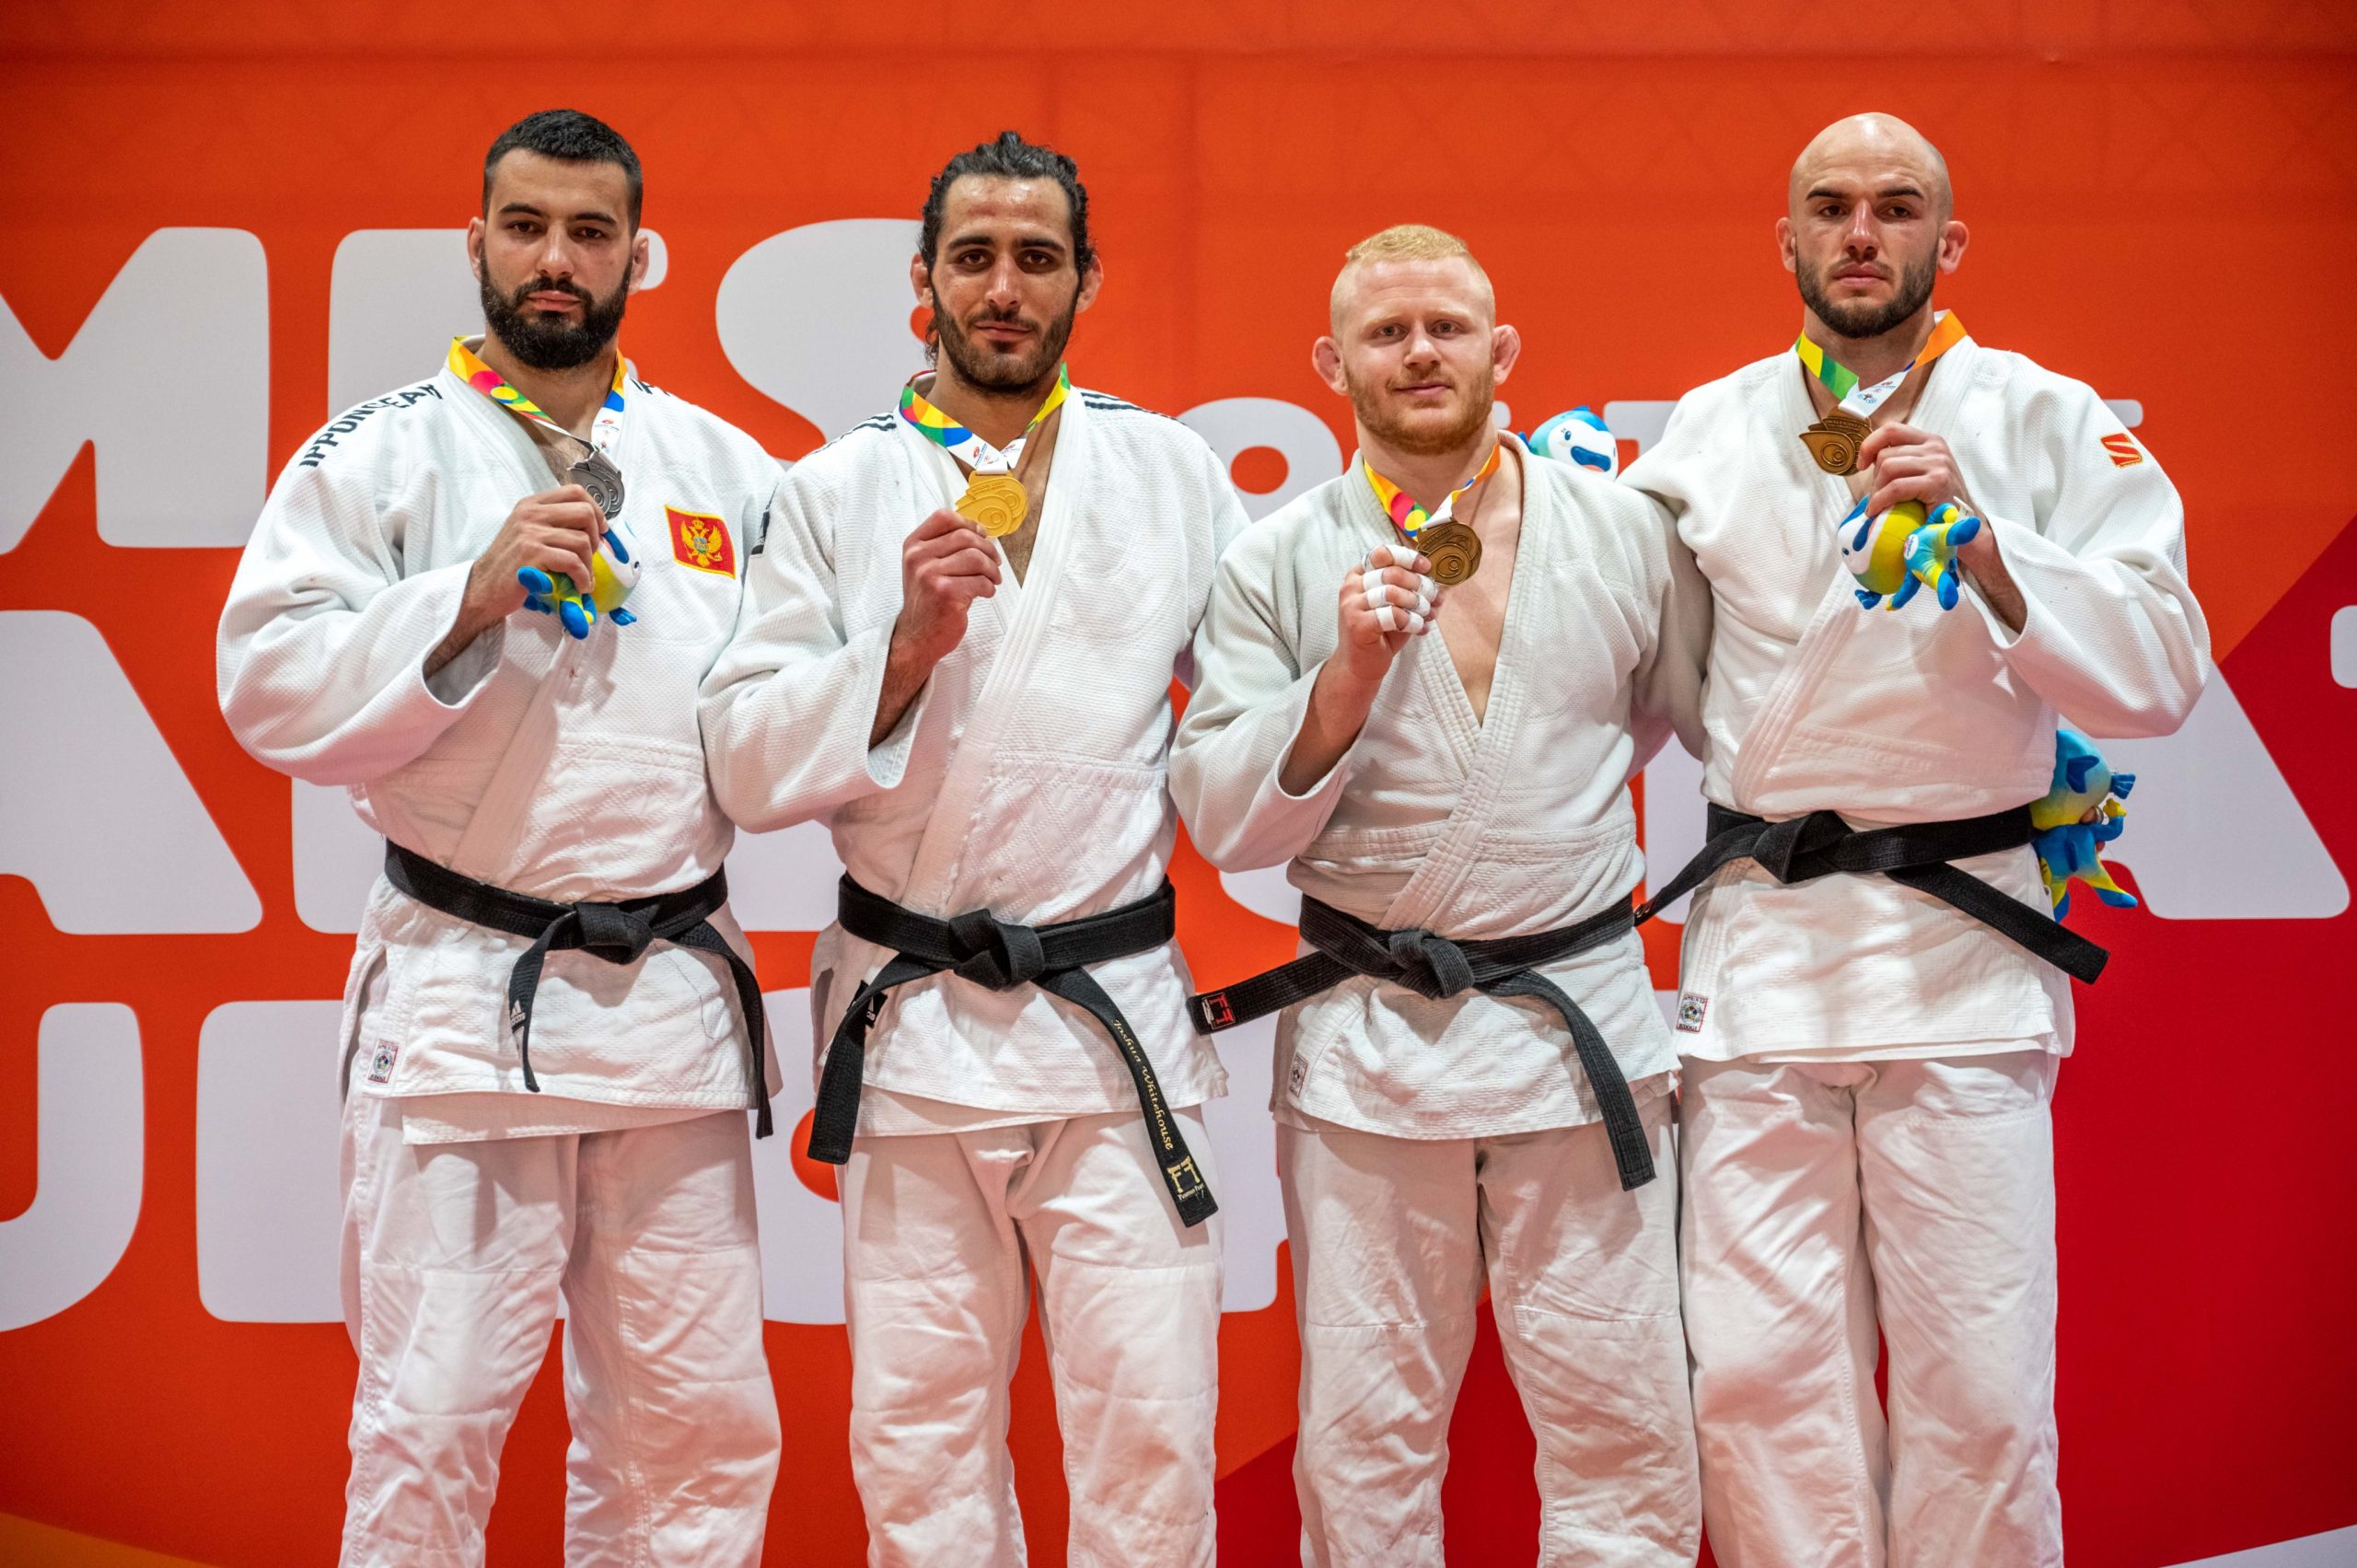 Group picture (close together). Asking the athletes to show the medals. Choose the one with all judoka with eyes open.